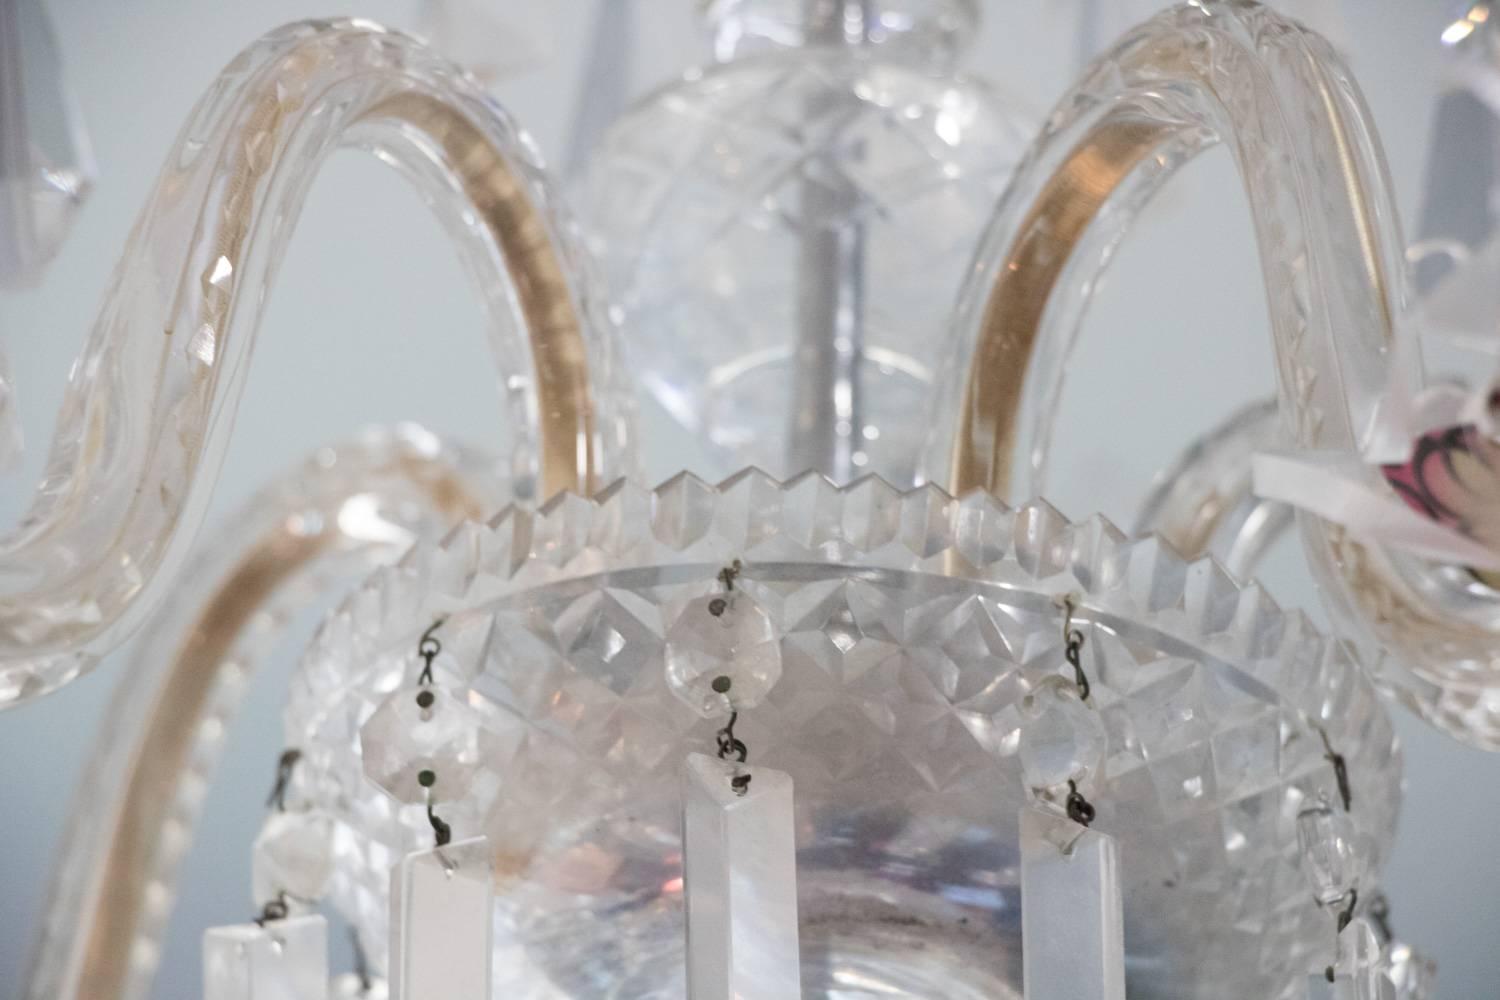 ON SALE NOW!! 1920s Waterford style fantastic! Cut crystal five-arm chandelier. Draped in lengths of mesmerizing sparkle - this cut crystal chandelier twinkles with 1920s flair. Featuring clear hand-cut crystal glimmering with beautiful iridescence!